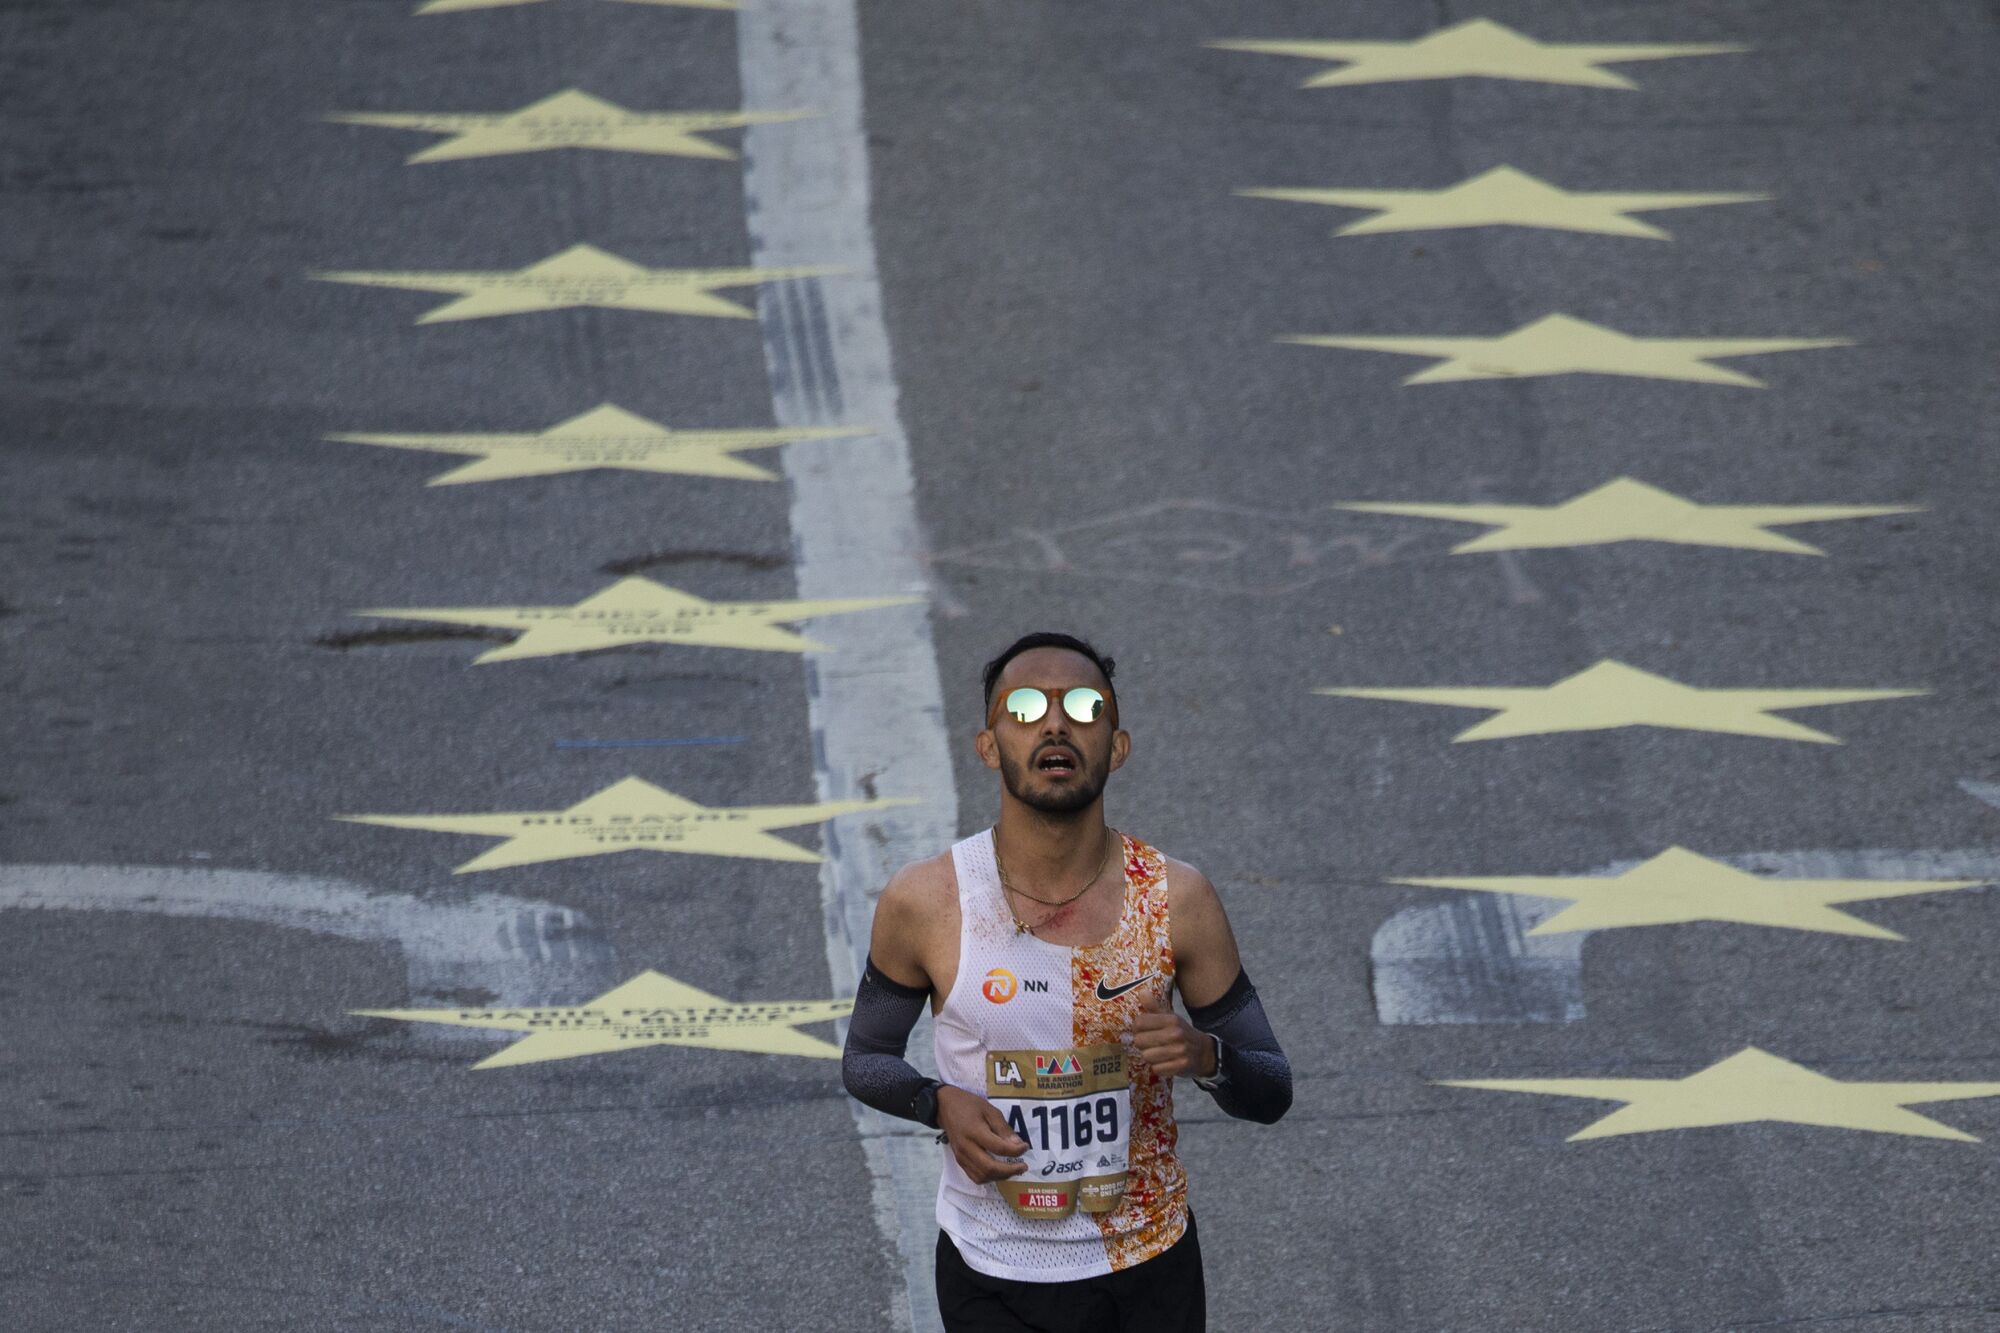  A runner crosses the finish line on Avenue of the Stars